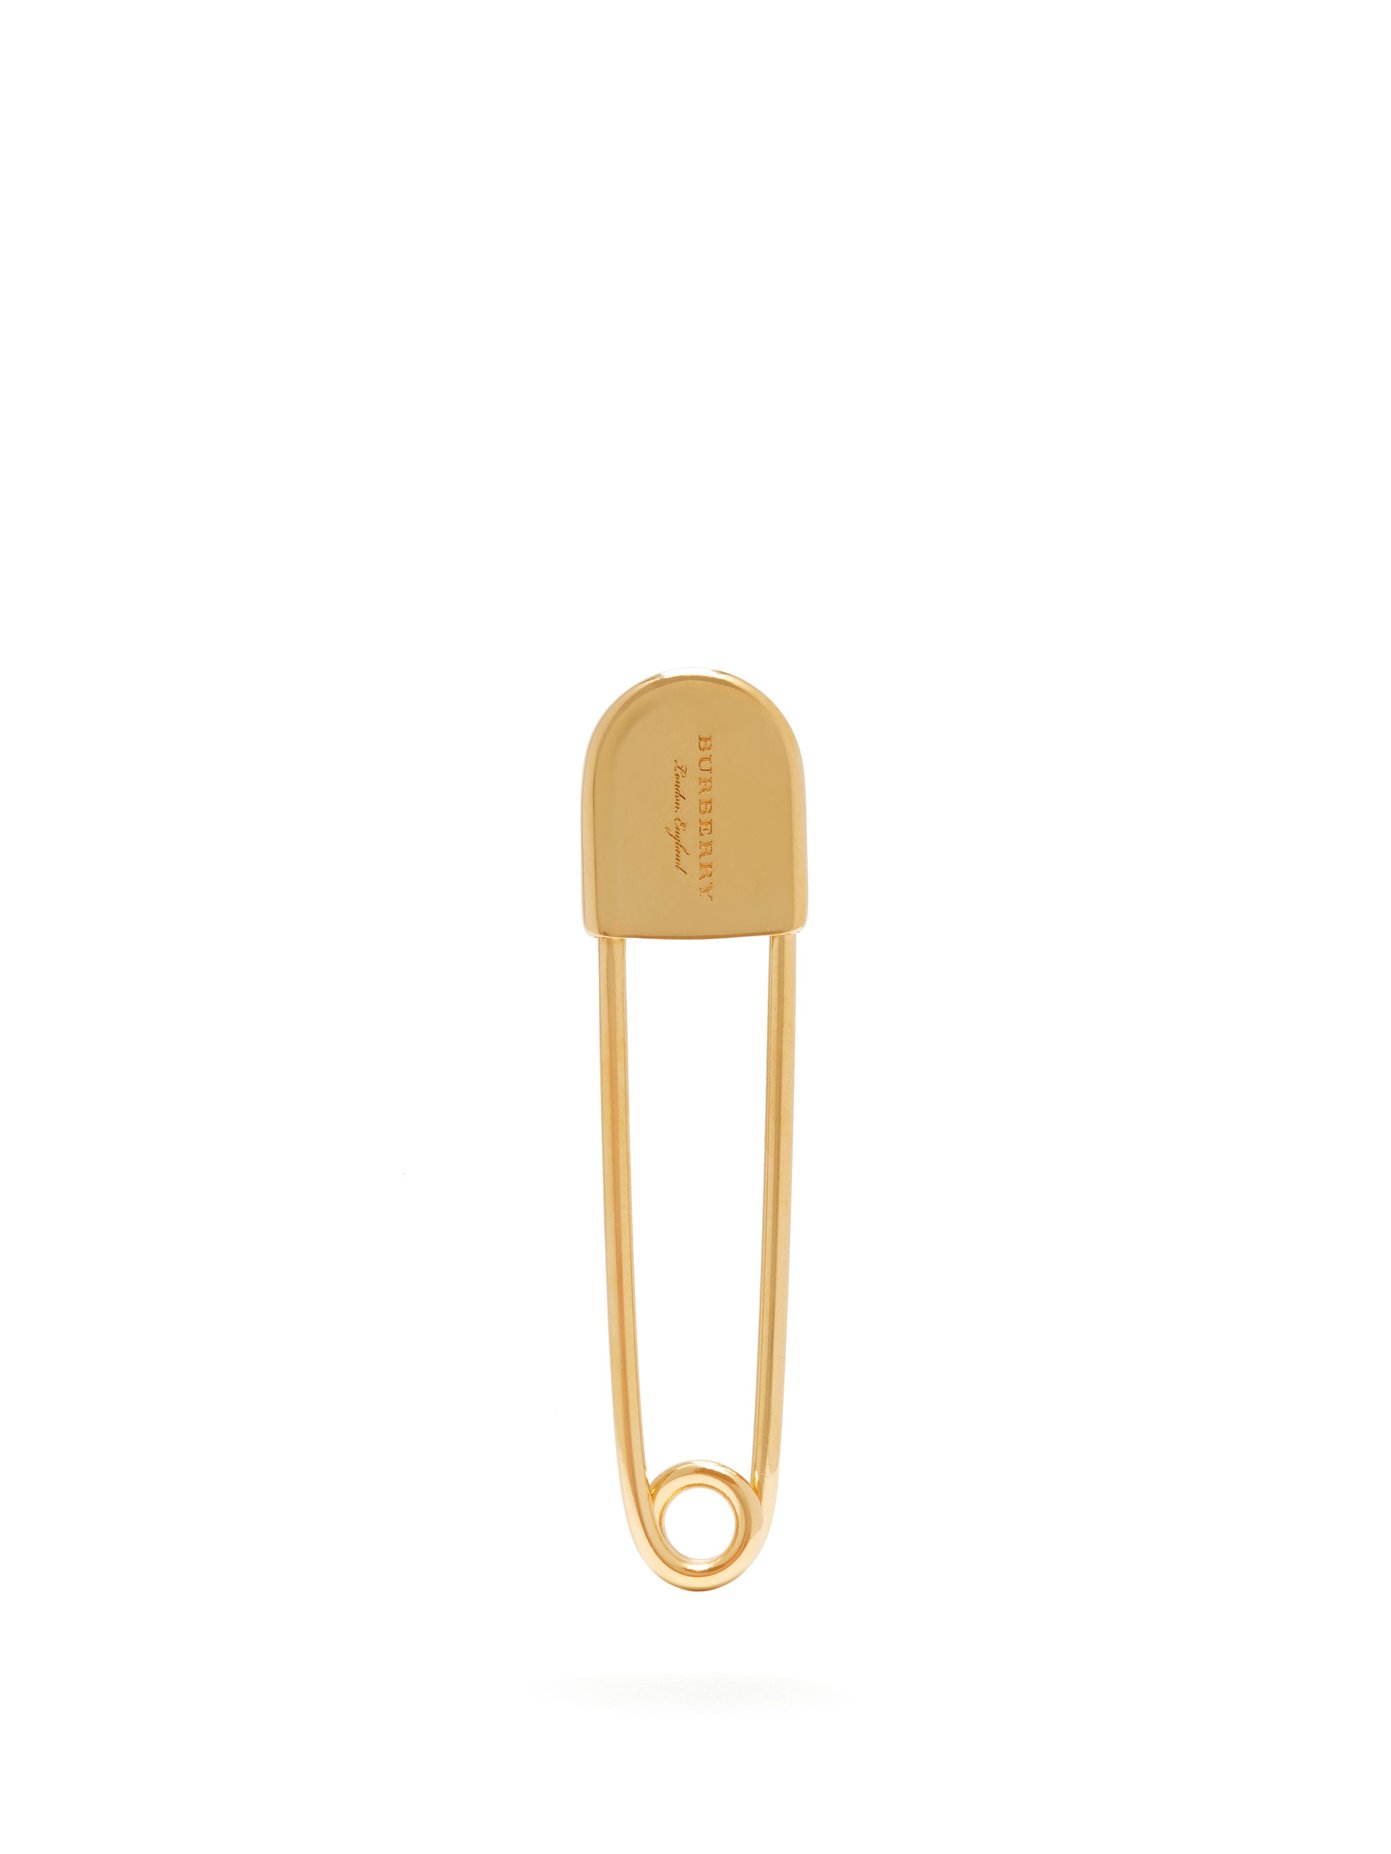 burberry safety pin